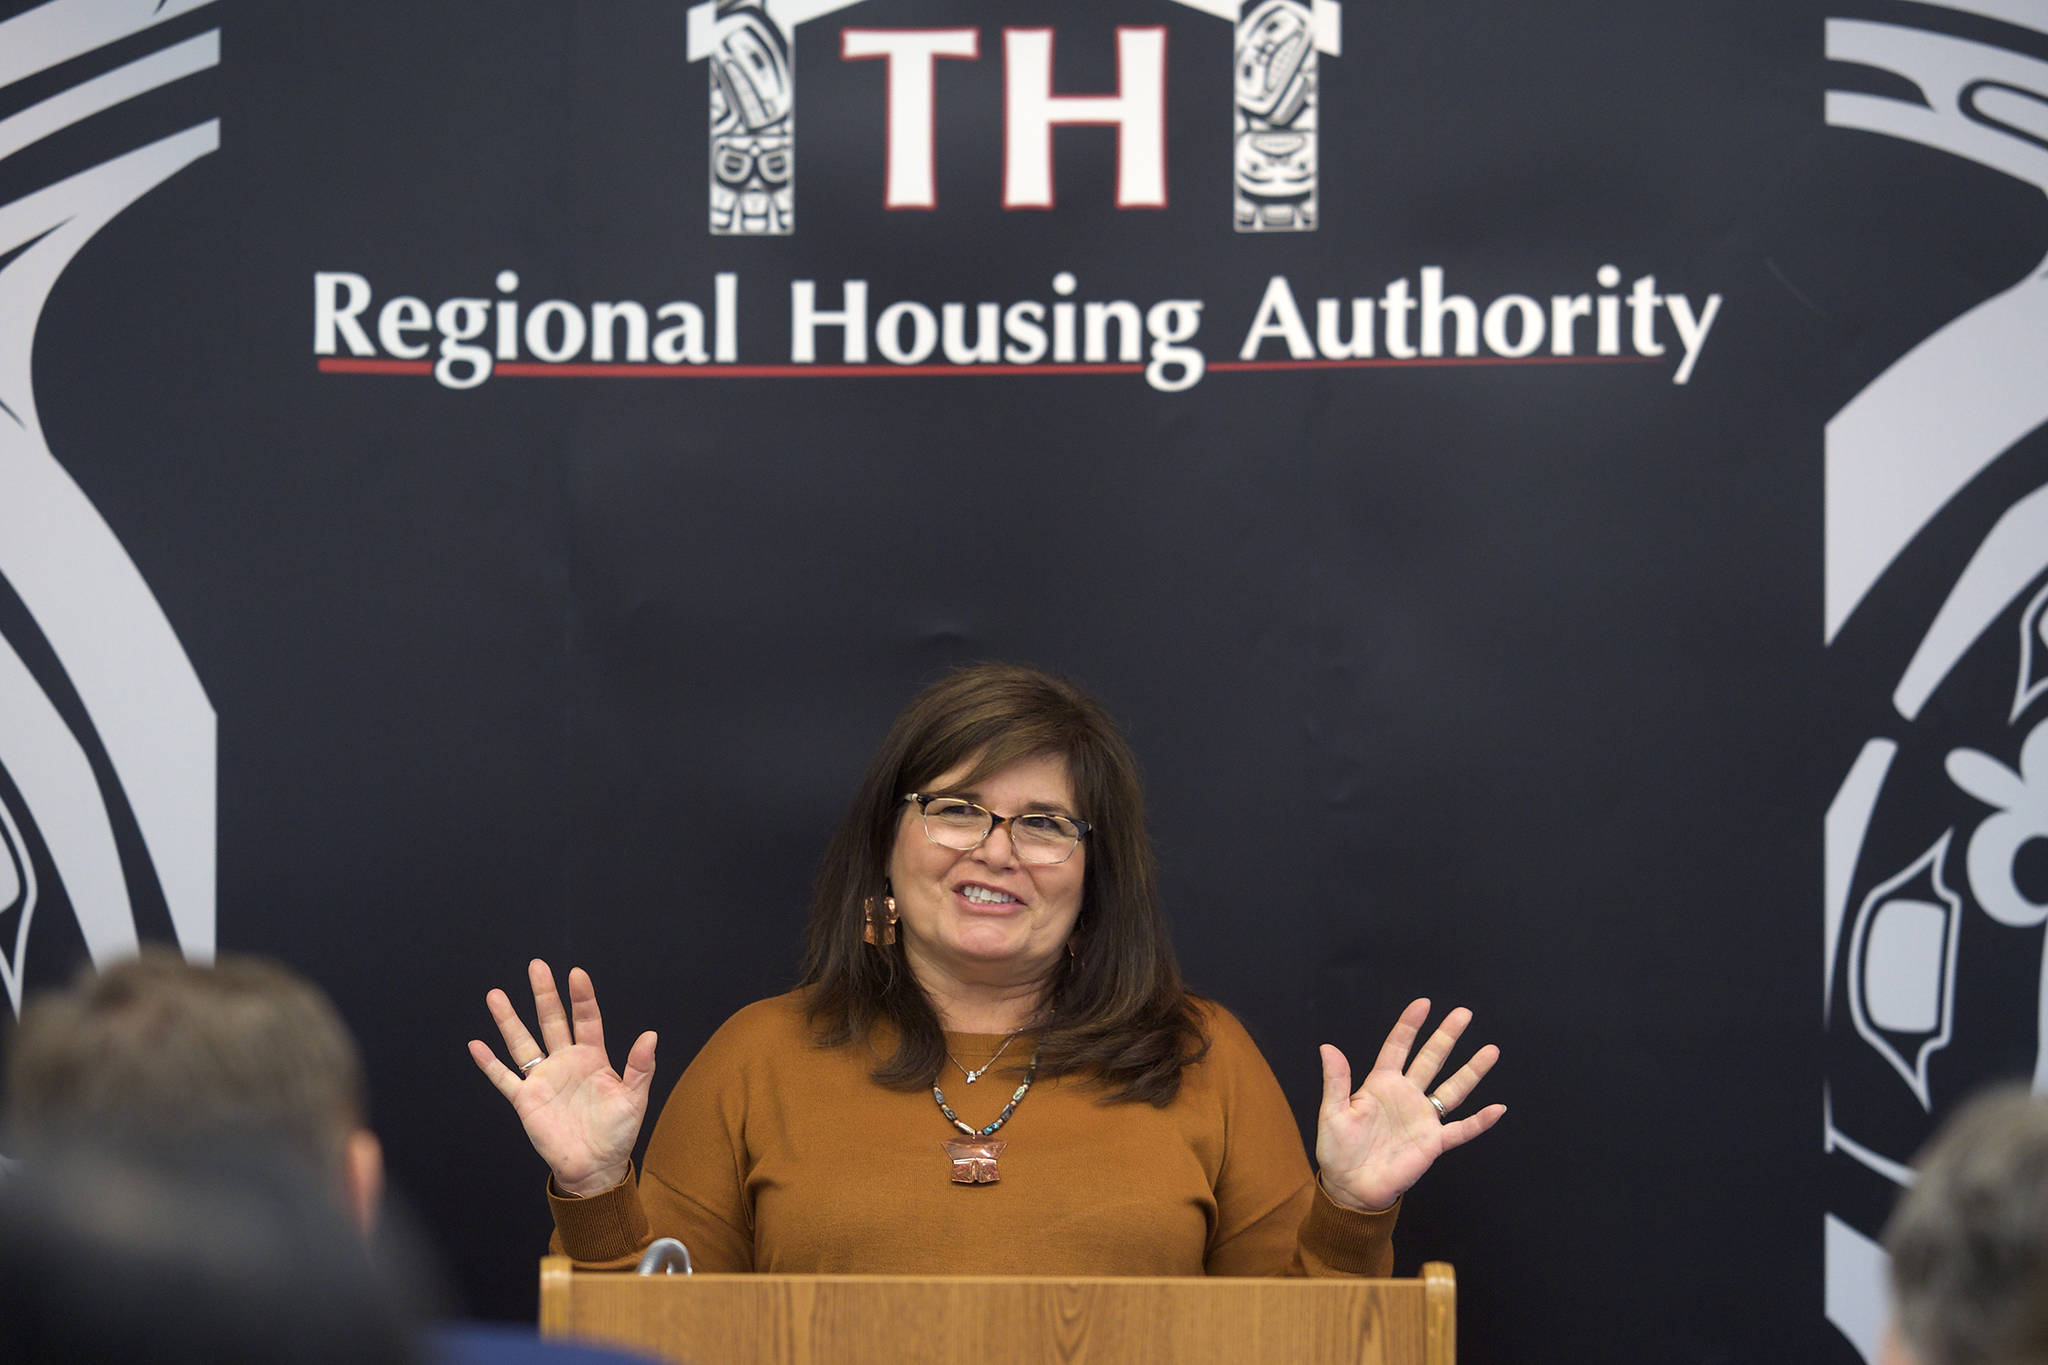 Jacqueline Pata, President & CEO of the Tlingit-Haida Regional Housing Authority, speaks at an announcement of a $1 million grant to help veteran’s housing needs in Southeast Alaska on Thursday, Oct. 3, 2019. (Michael Penn | Juneau Empire)